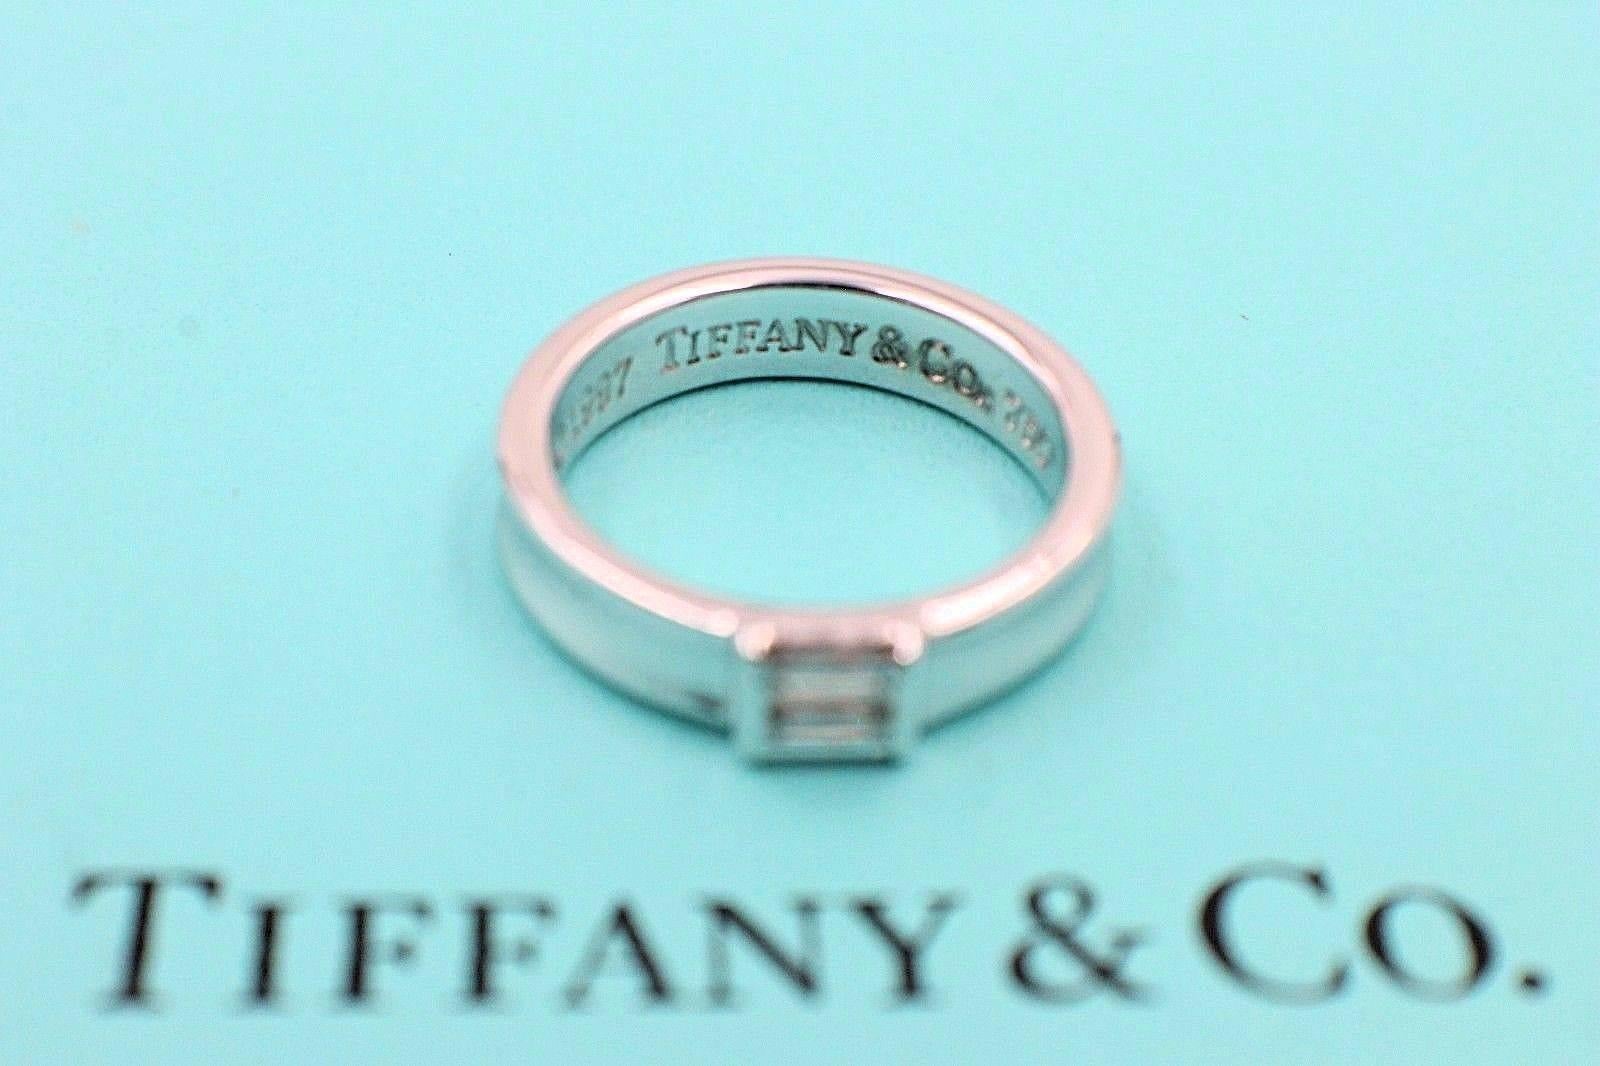 Tiffany & Co. Baguette Diamond and 18 Karat Gold Stackable Wedding Band Ring In Excellent Condition For Sale In San Diego, CA